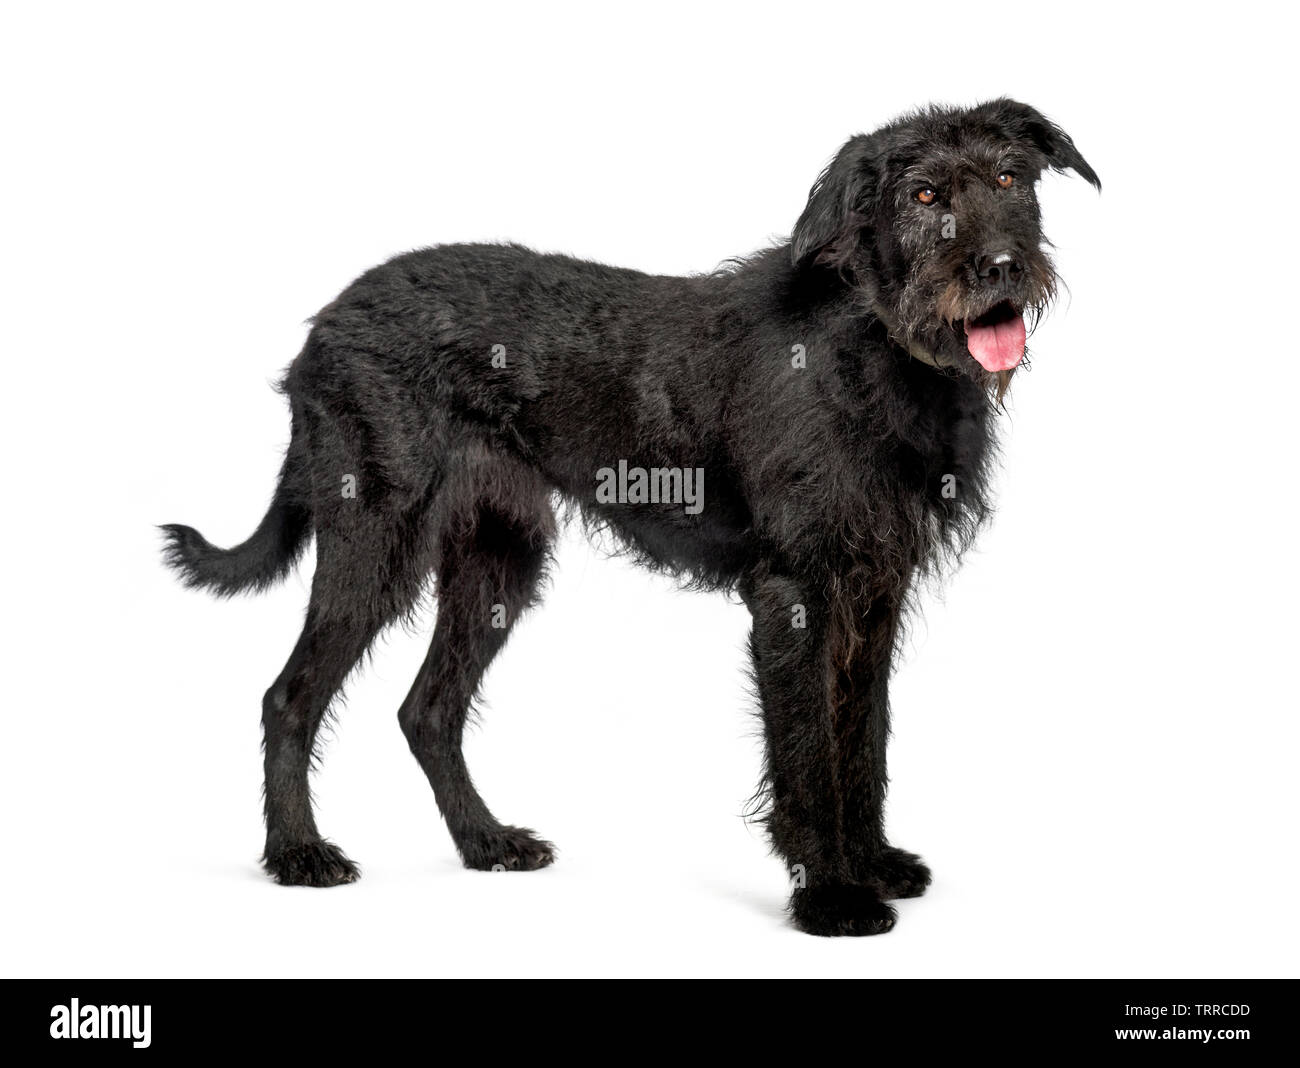 Bouvier des Flandres, 9 years old, in front of white background Stock Photo